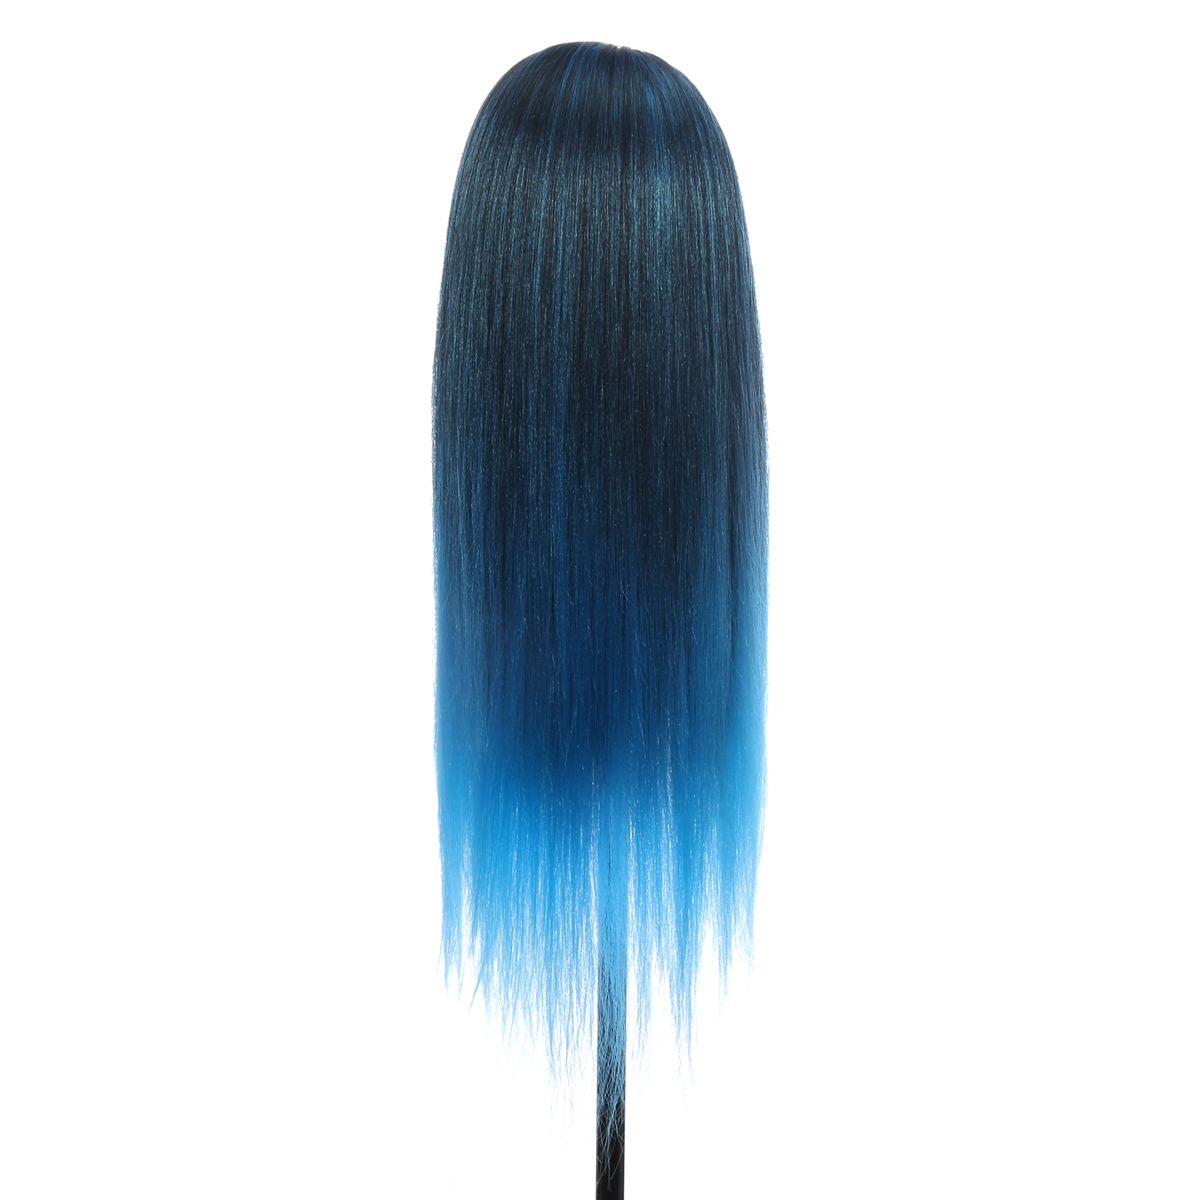 26-Colorful-Hair-Hairdressing-Practice-Training-Head-Mannequin-Salon-With-Clamp-1236992